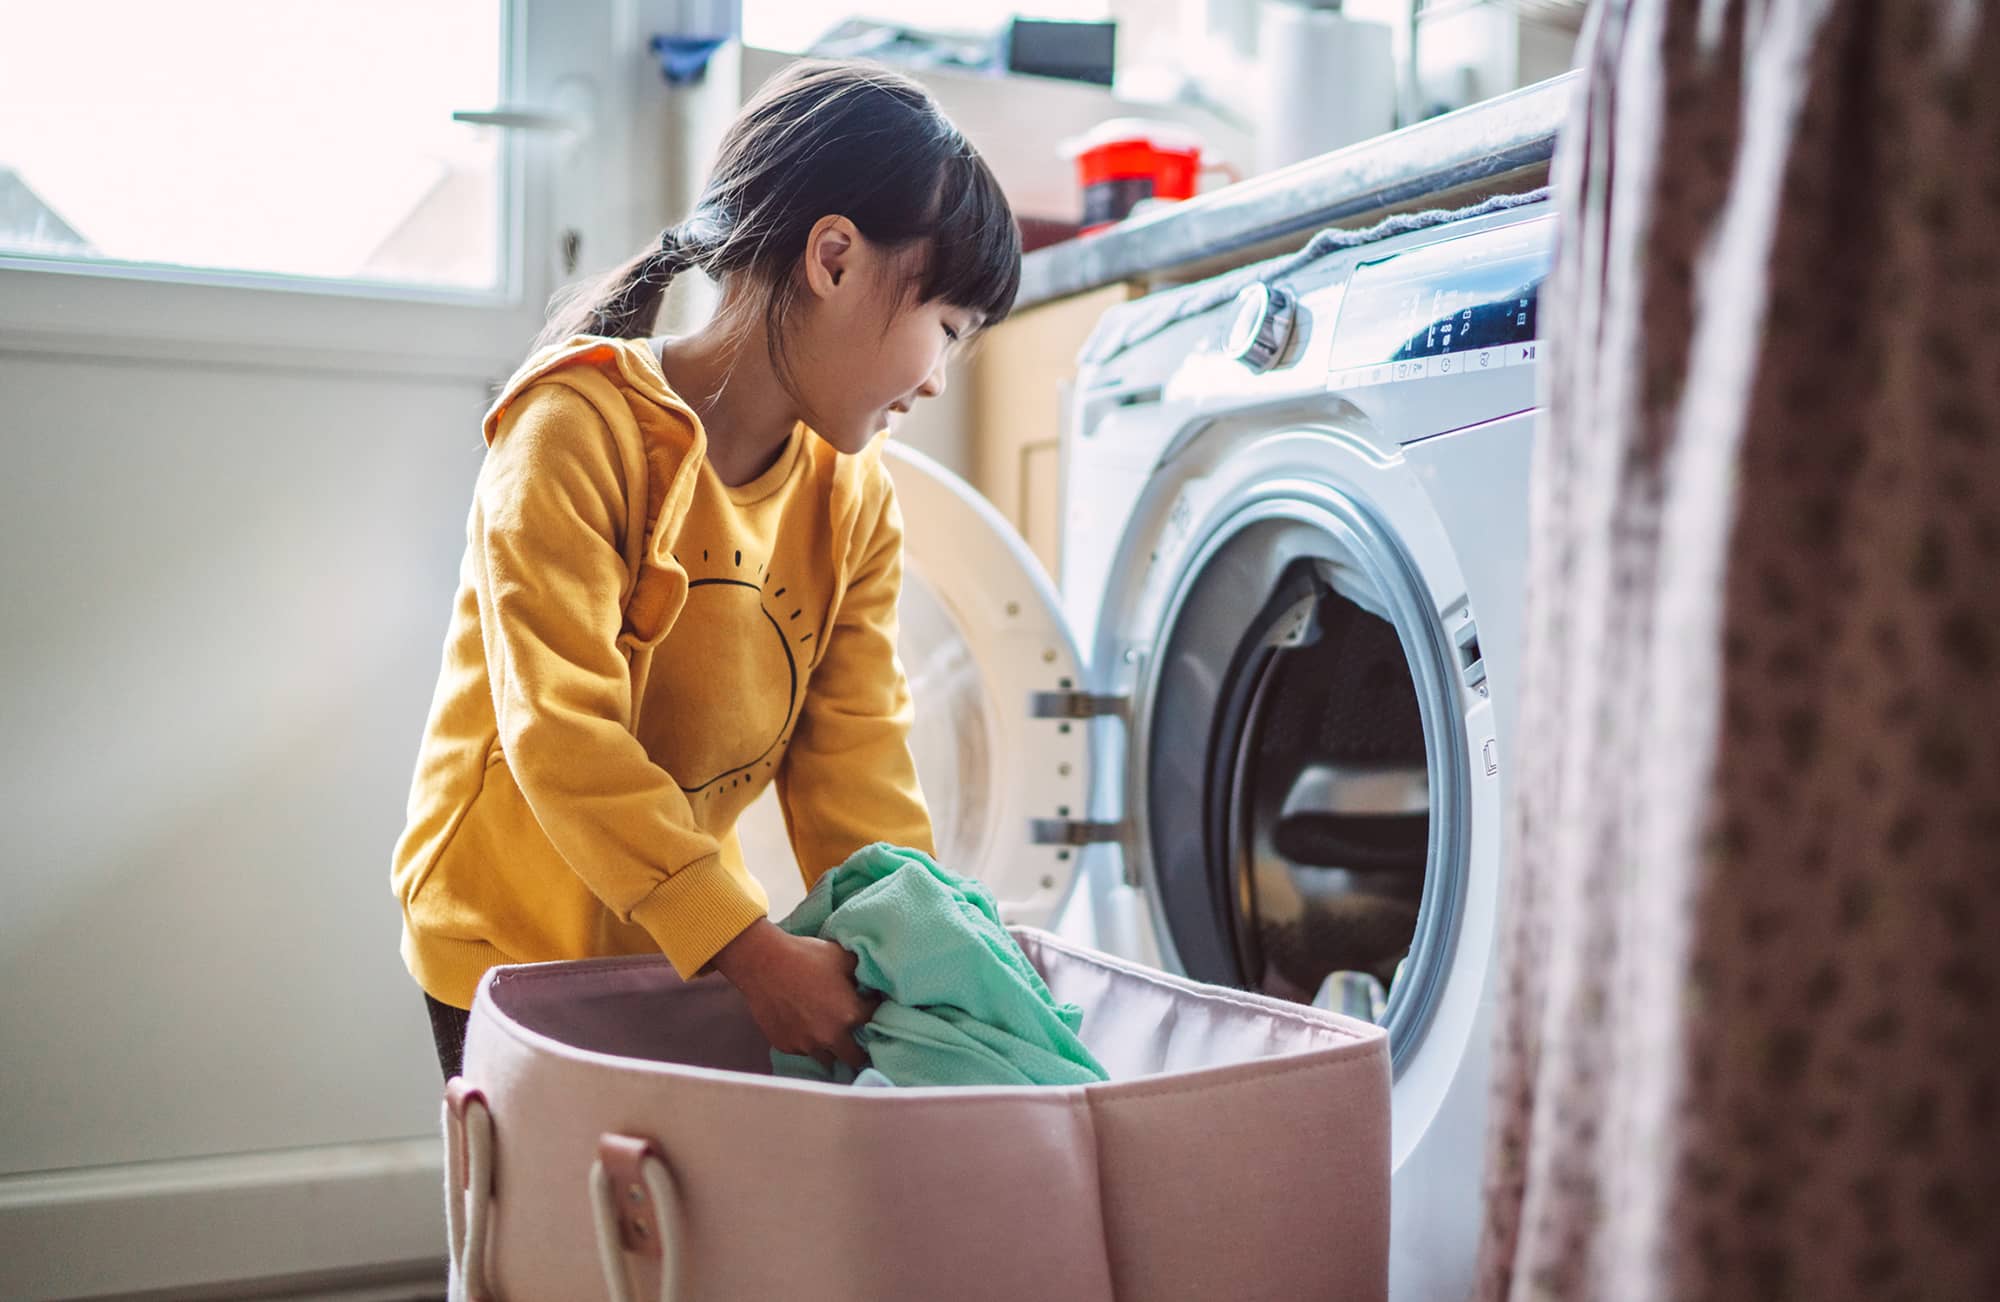 Shop for laundry room essentials, showing a small girl loading a washer 